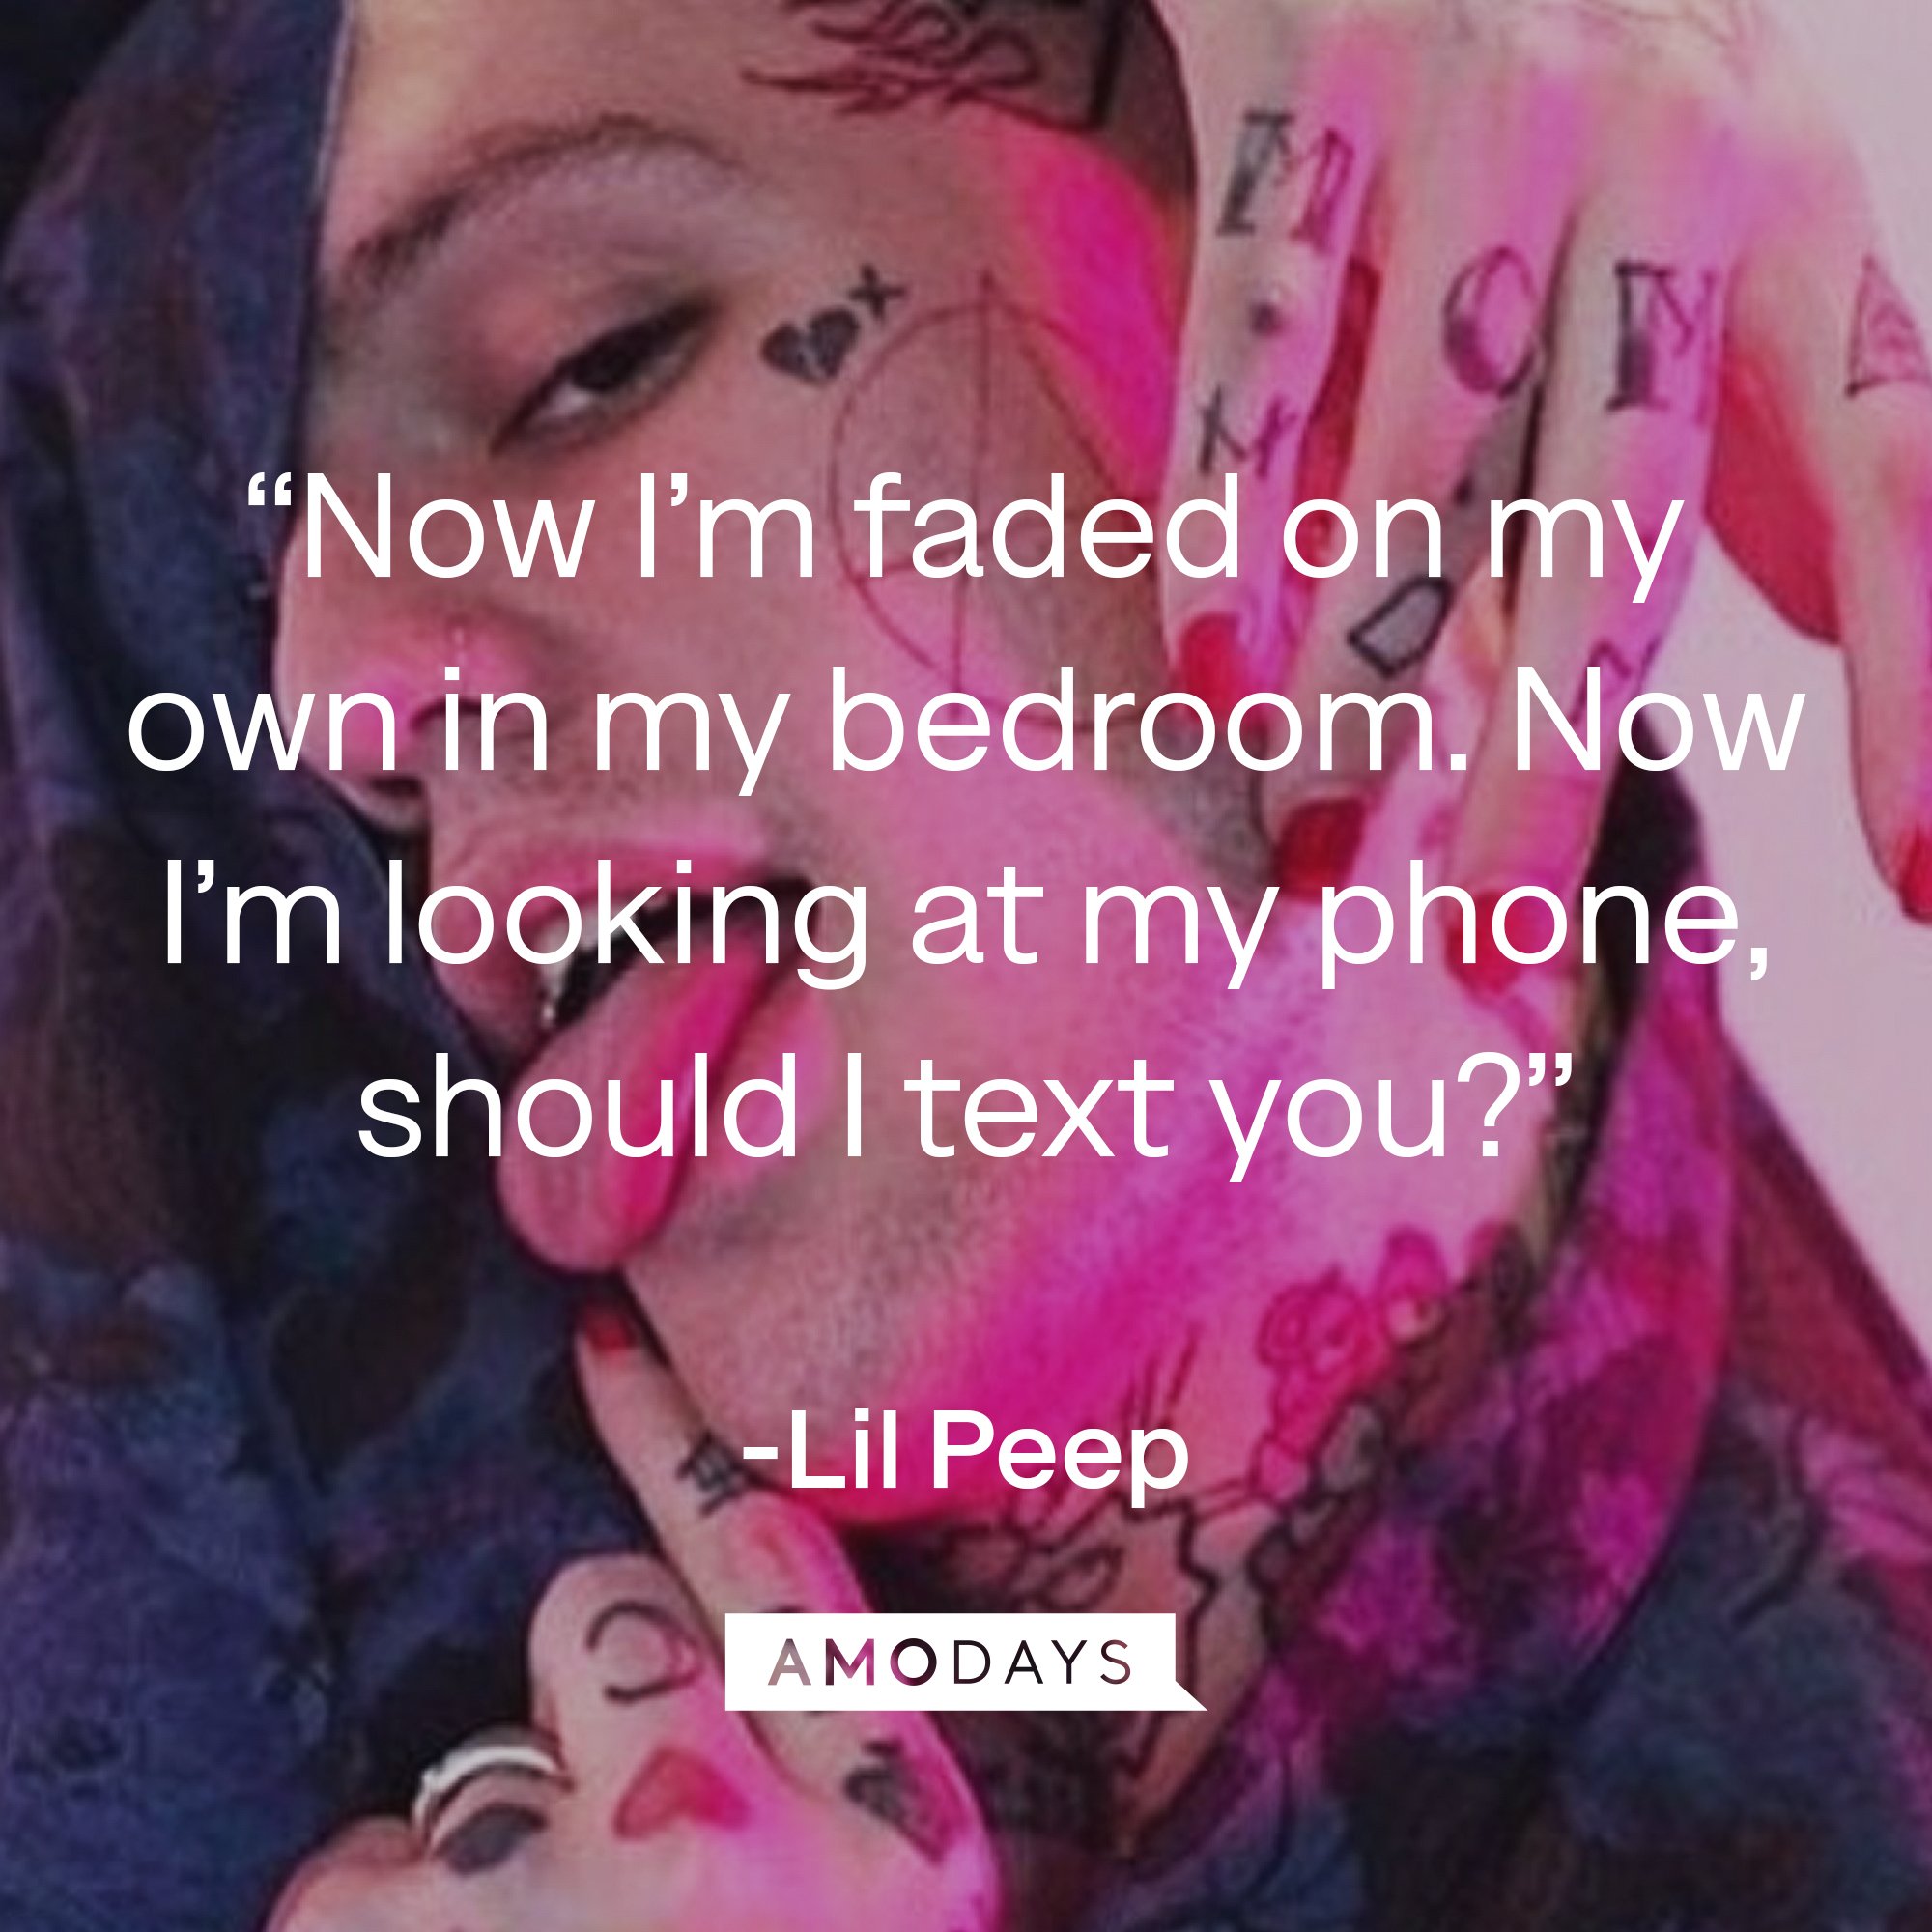 Lil Peep's quote: “Now I’m faded on my own in my bedroom. Now I’m looking at my phone, should I text you?” | Image: AmoDays